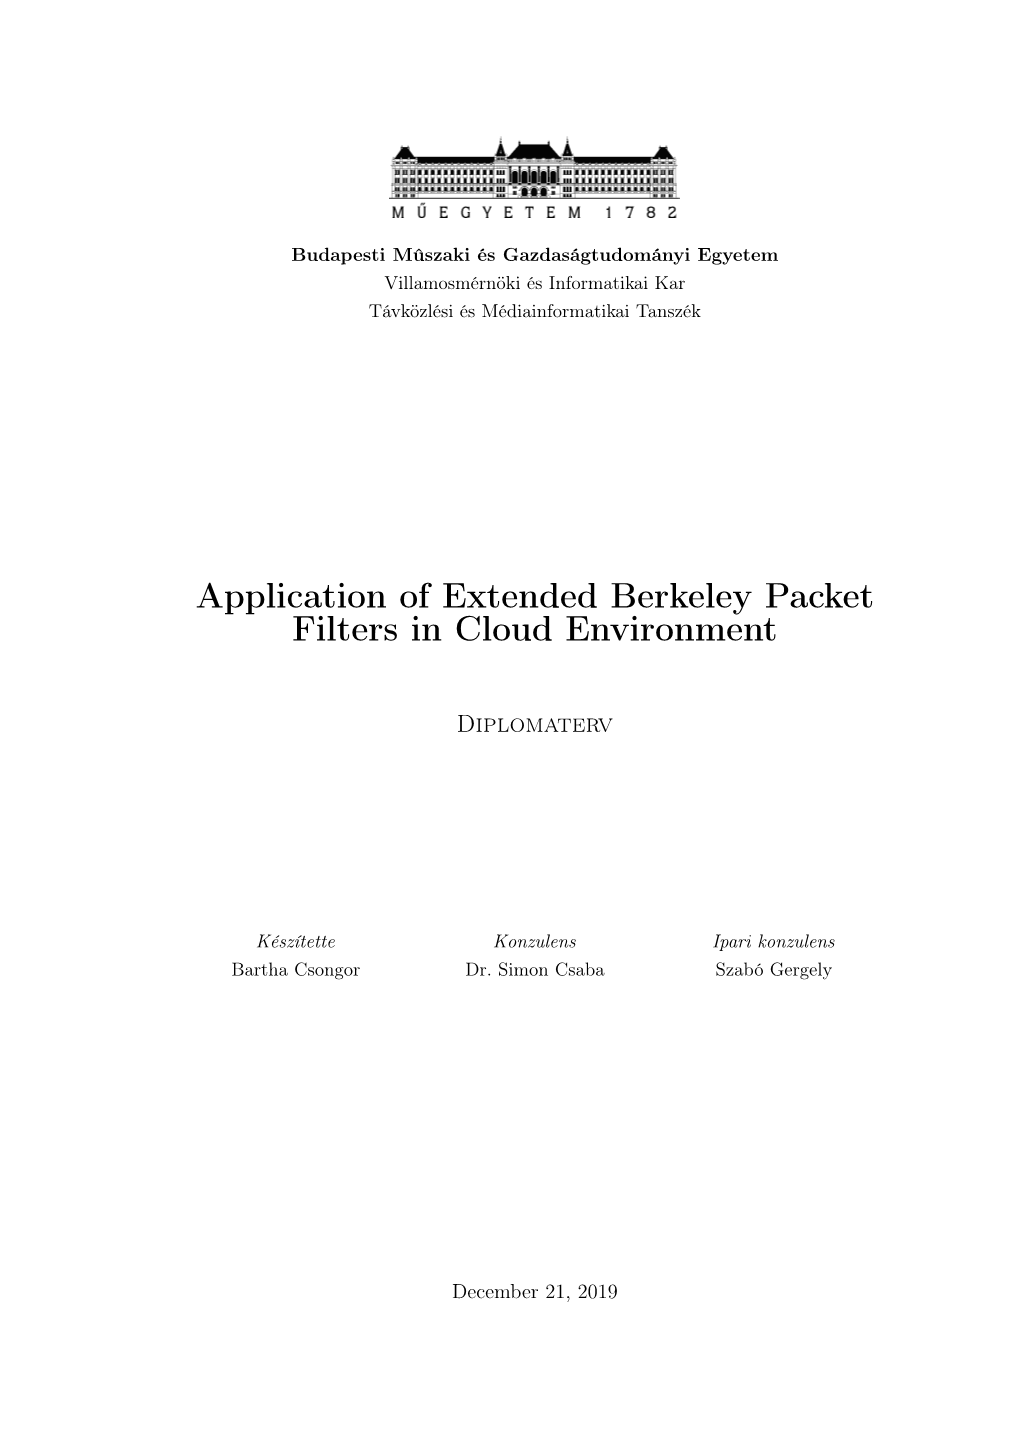 Application of Extended Berkeley Packet Filters in Cloud Environment